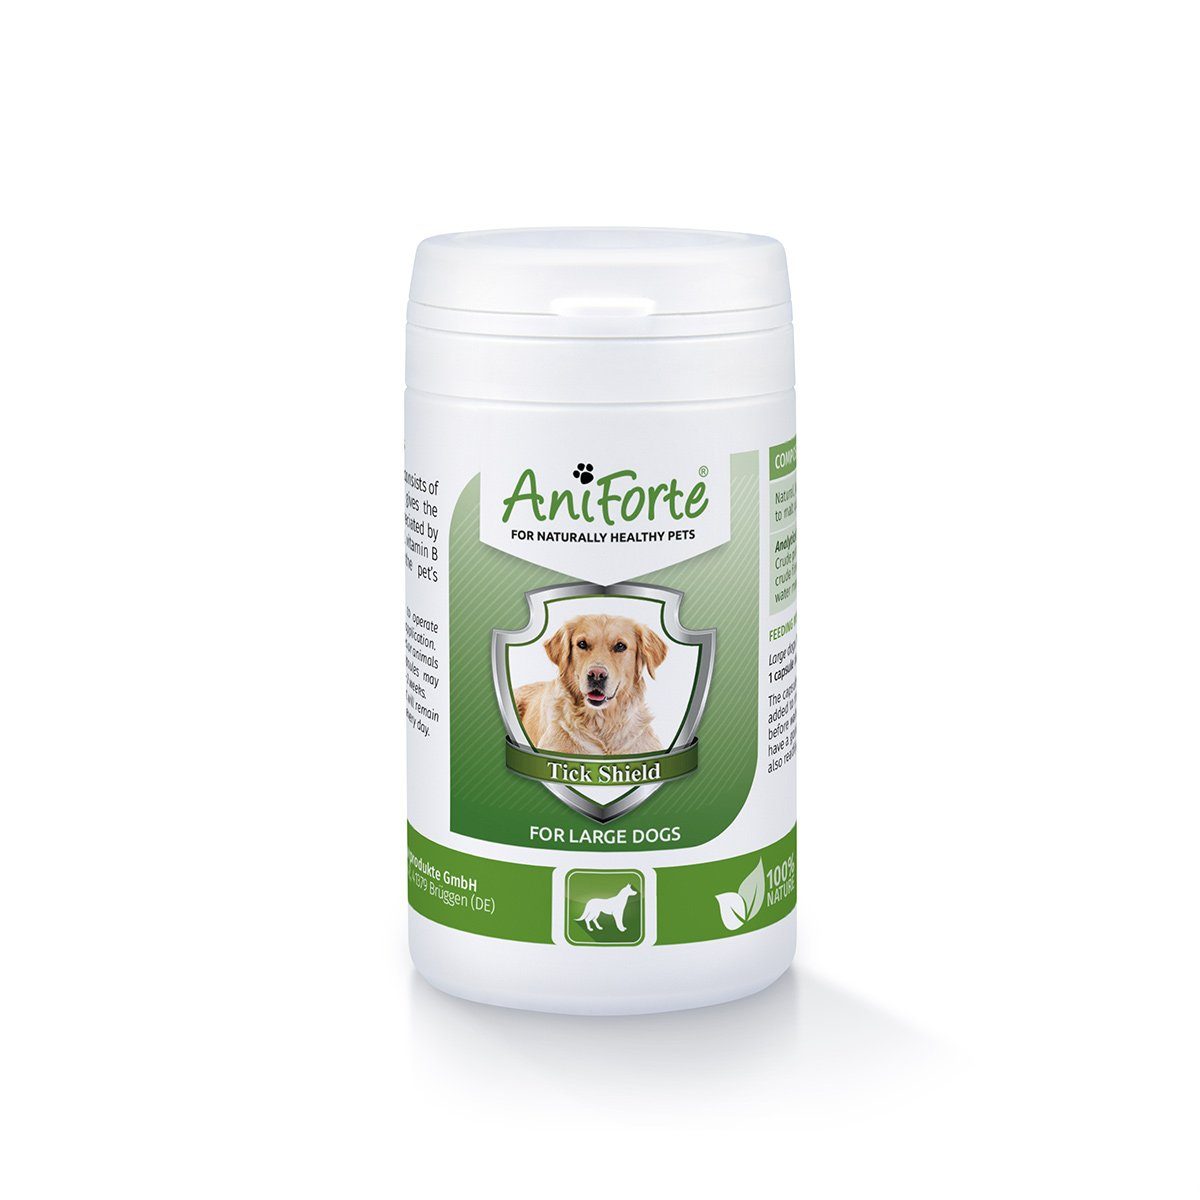 SALE Tick Shield For Large Dogs from 77-110lbs (35-50kg) - 60 Capsules